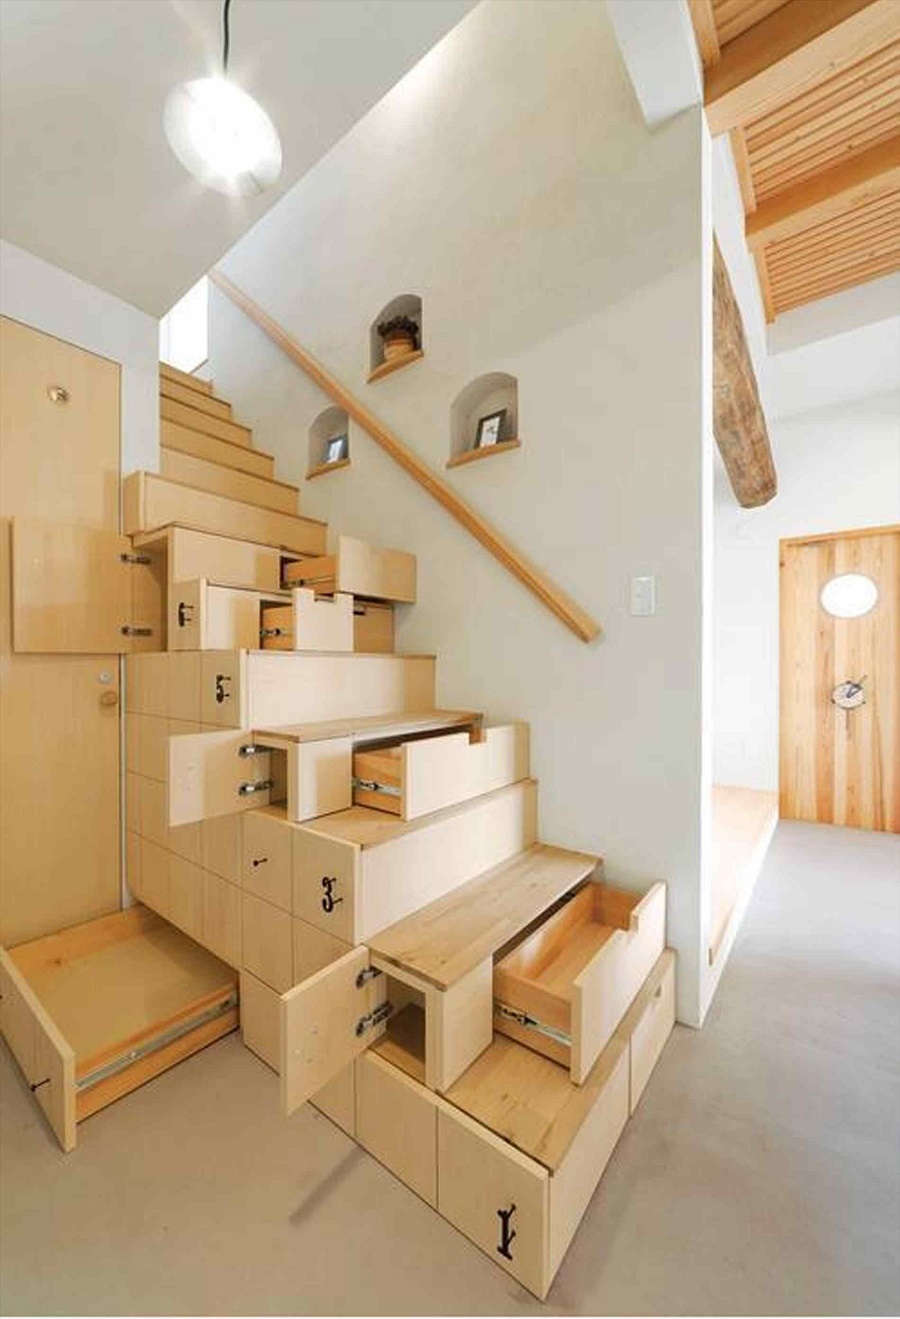 Use all the space productively with staircase drawers.